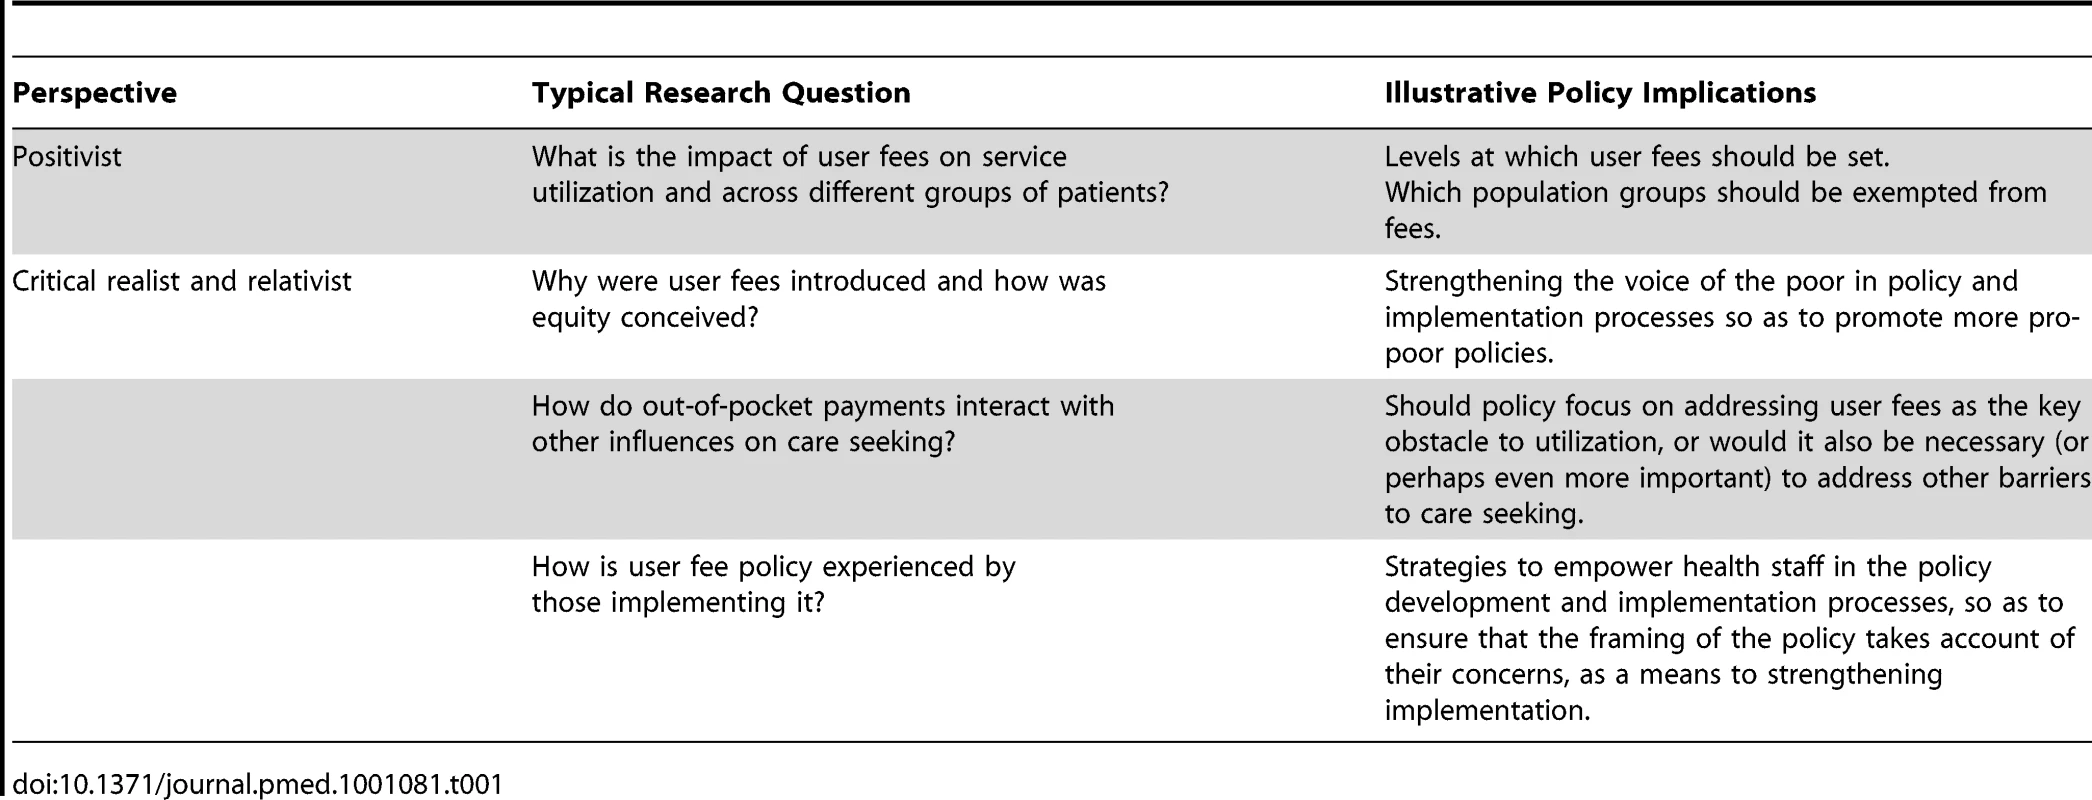 Possible policy implications of alternative types of research on user fees.